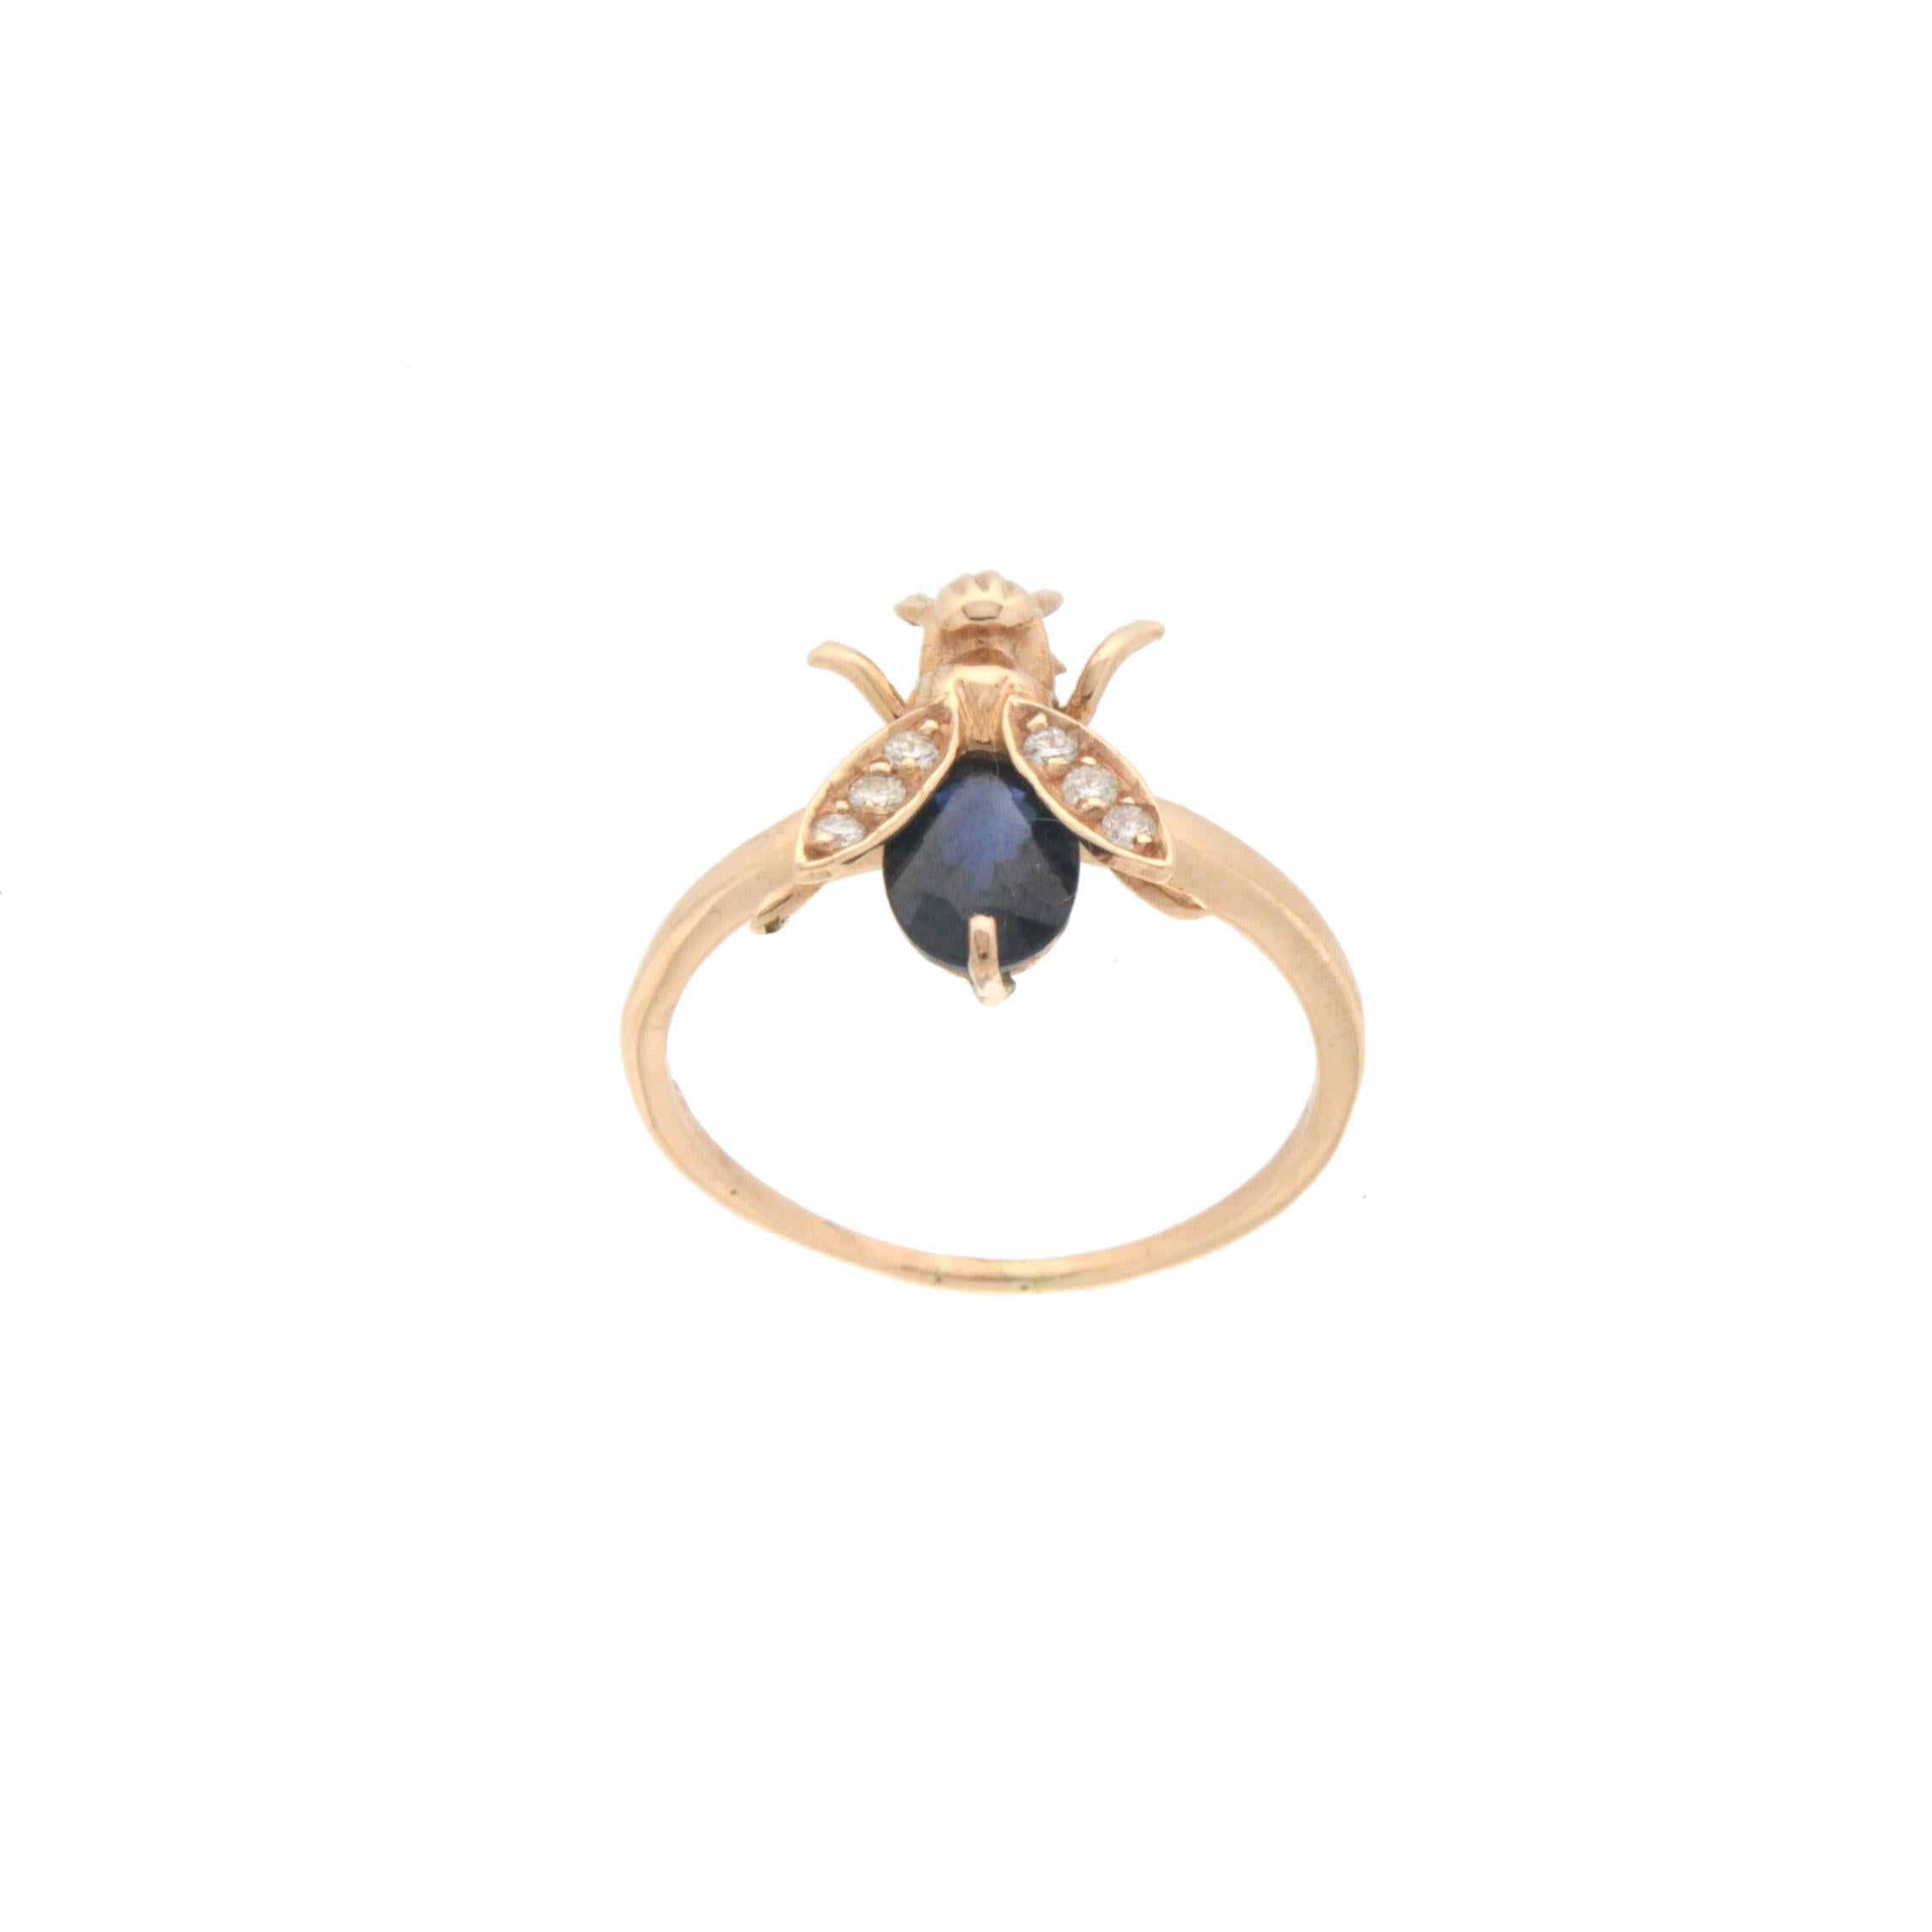 14 karat yellow gold cocktail ring. Handmade by our artisans assembled with sapphire and diamonds

Sapphire weight 0.44 karat
Diamonds weight 0.09 karat
Ring total weight 2.60 grams
Ring size 7.75 US 15.80 Ita

(all rings are can be resized)